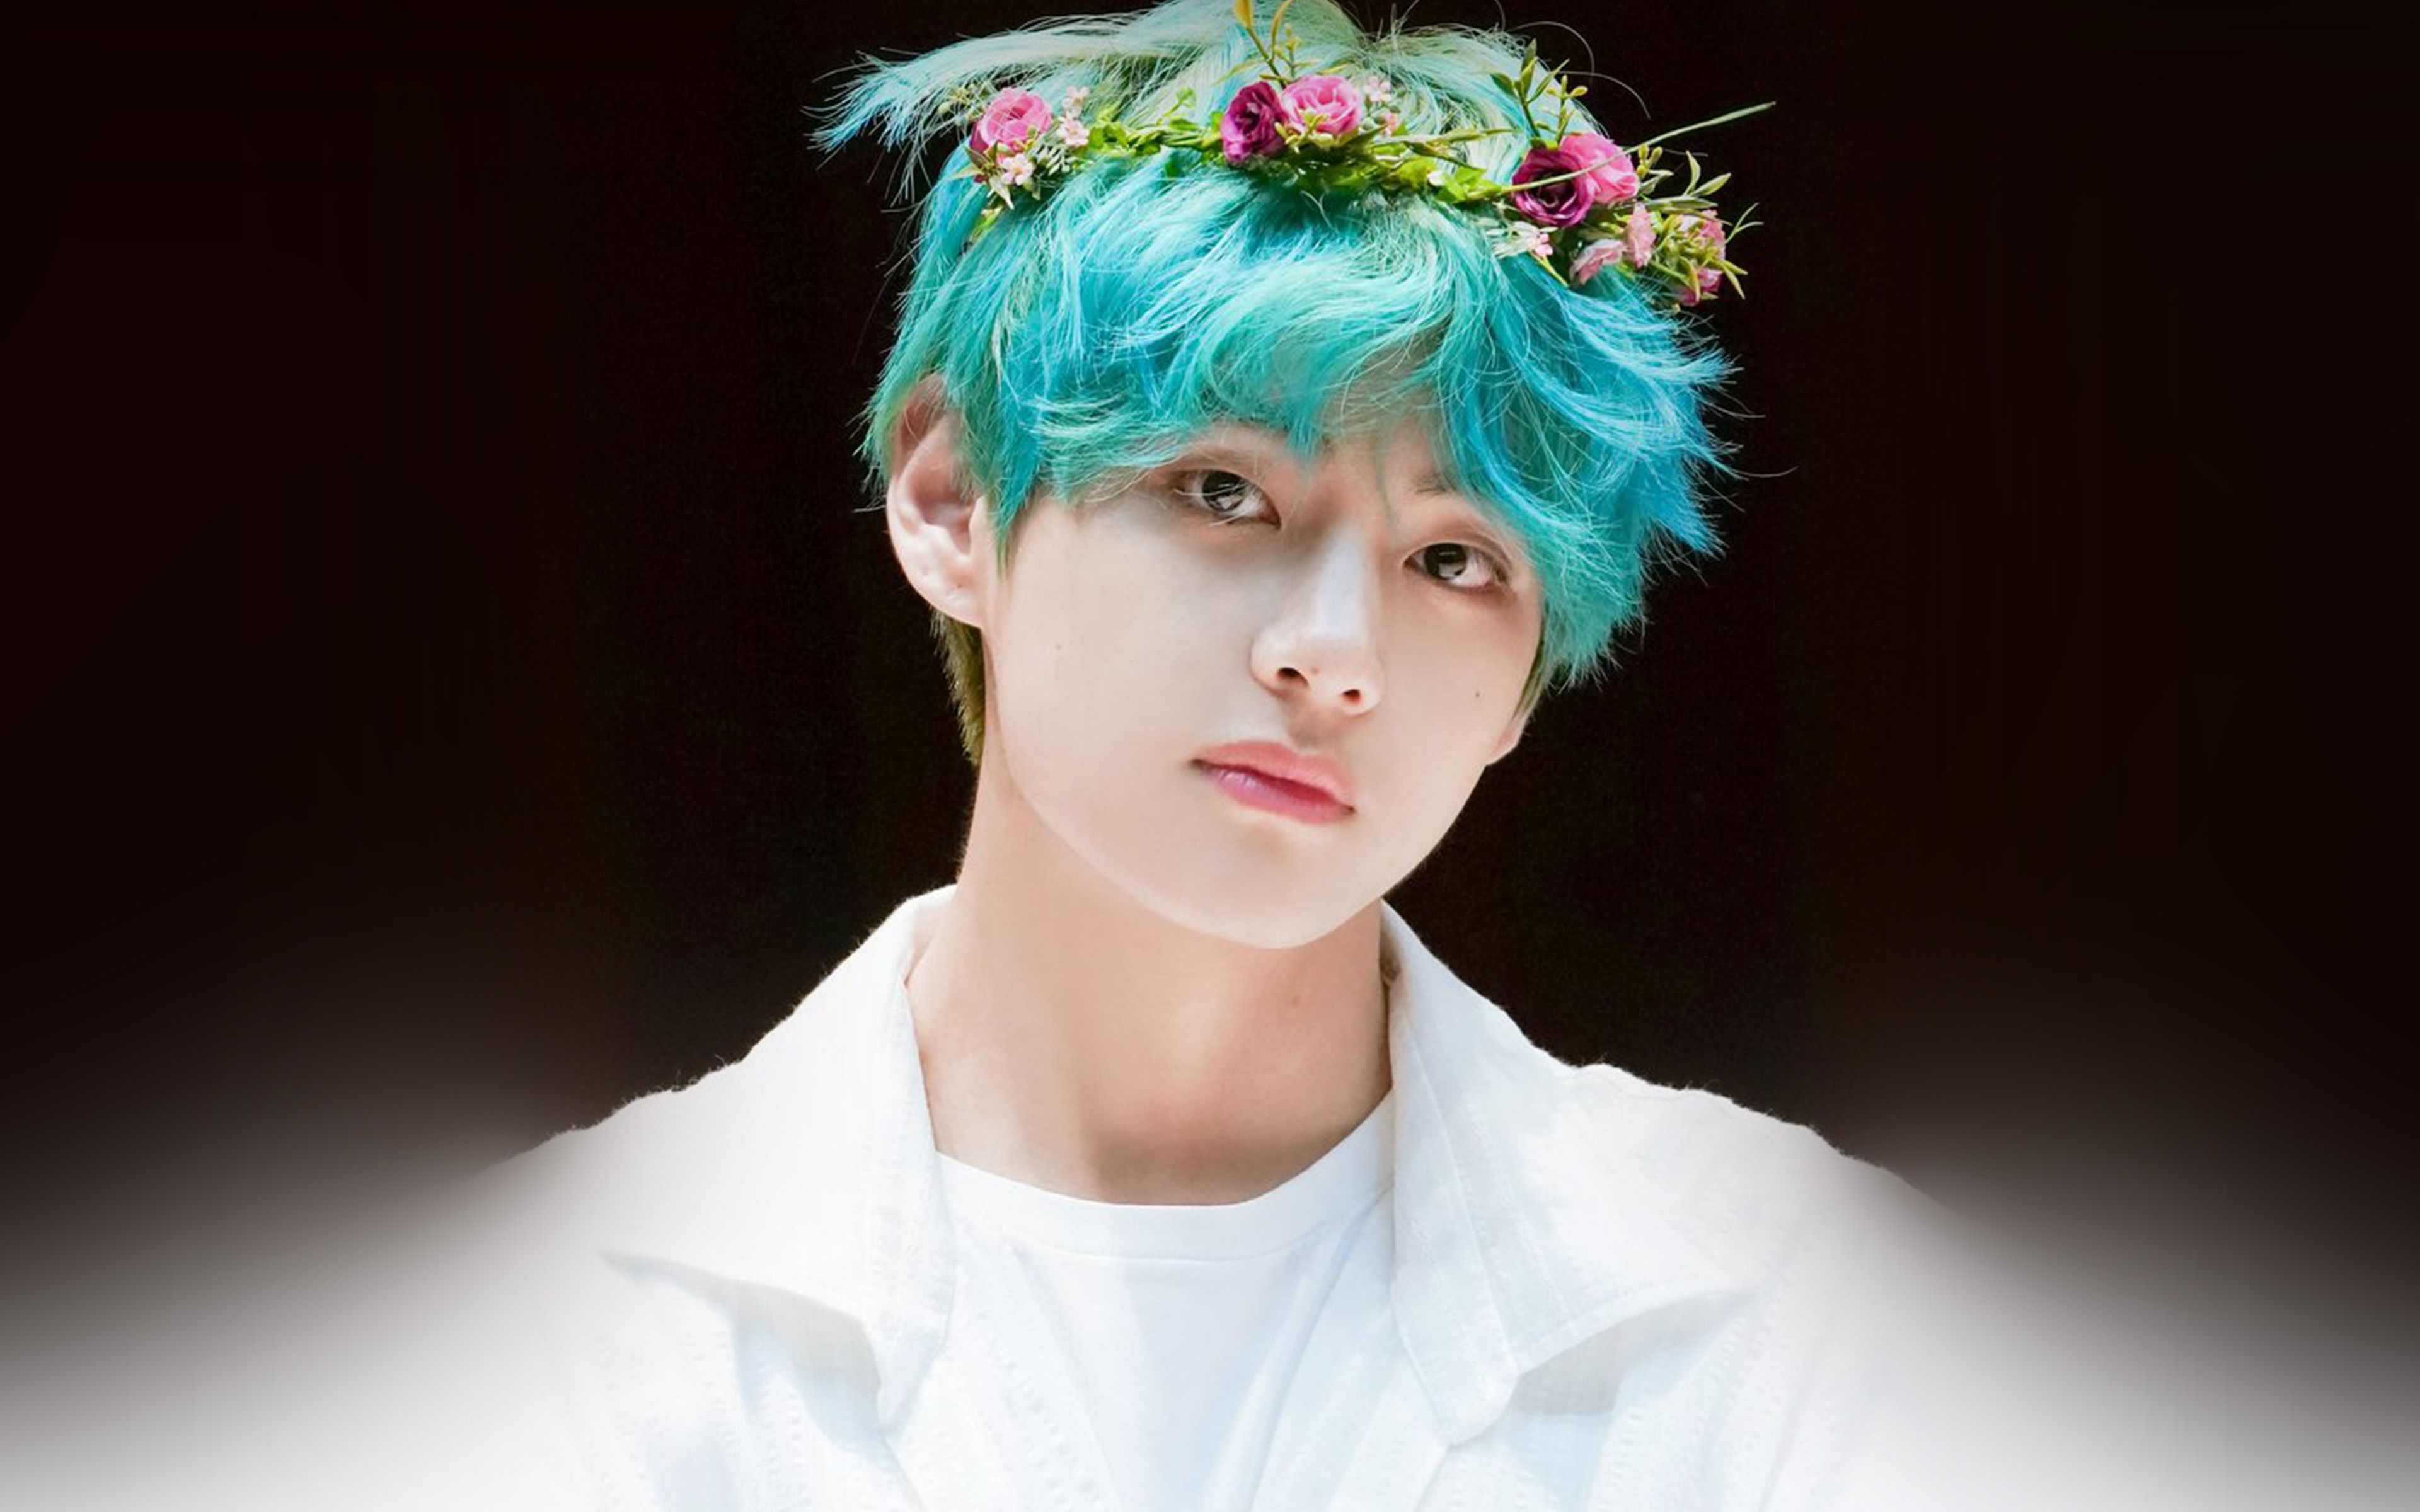 72 Taehyung Cute Aesthetic Wallpaper For FREE - MyWeb